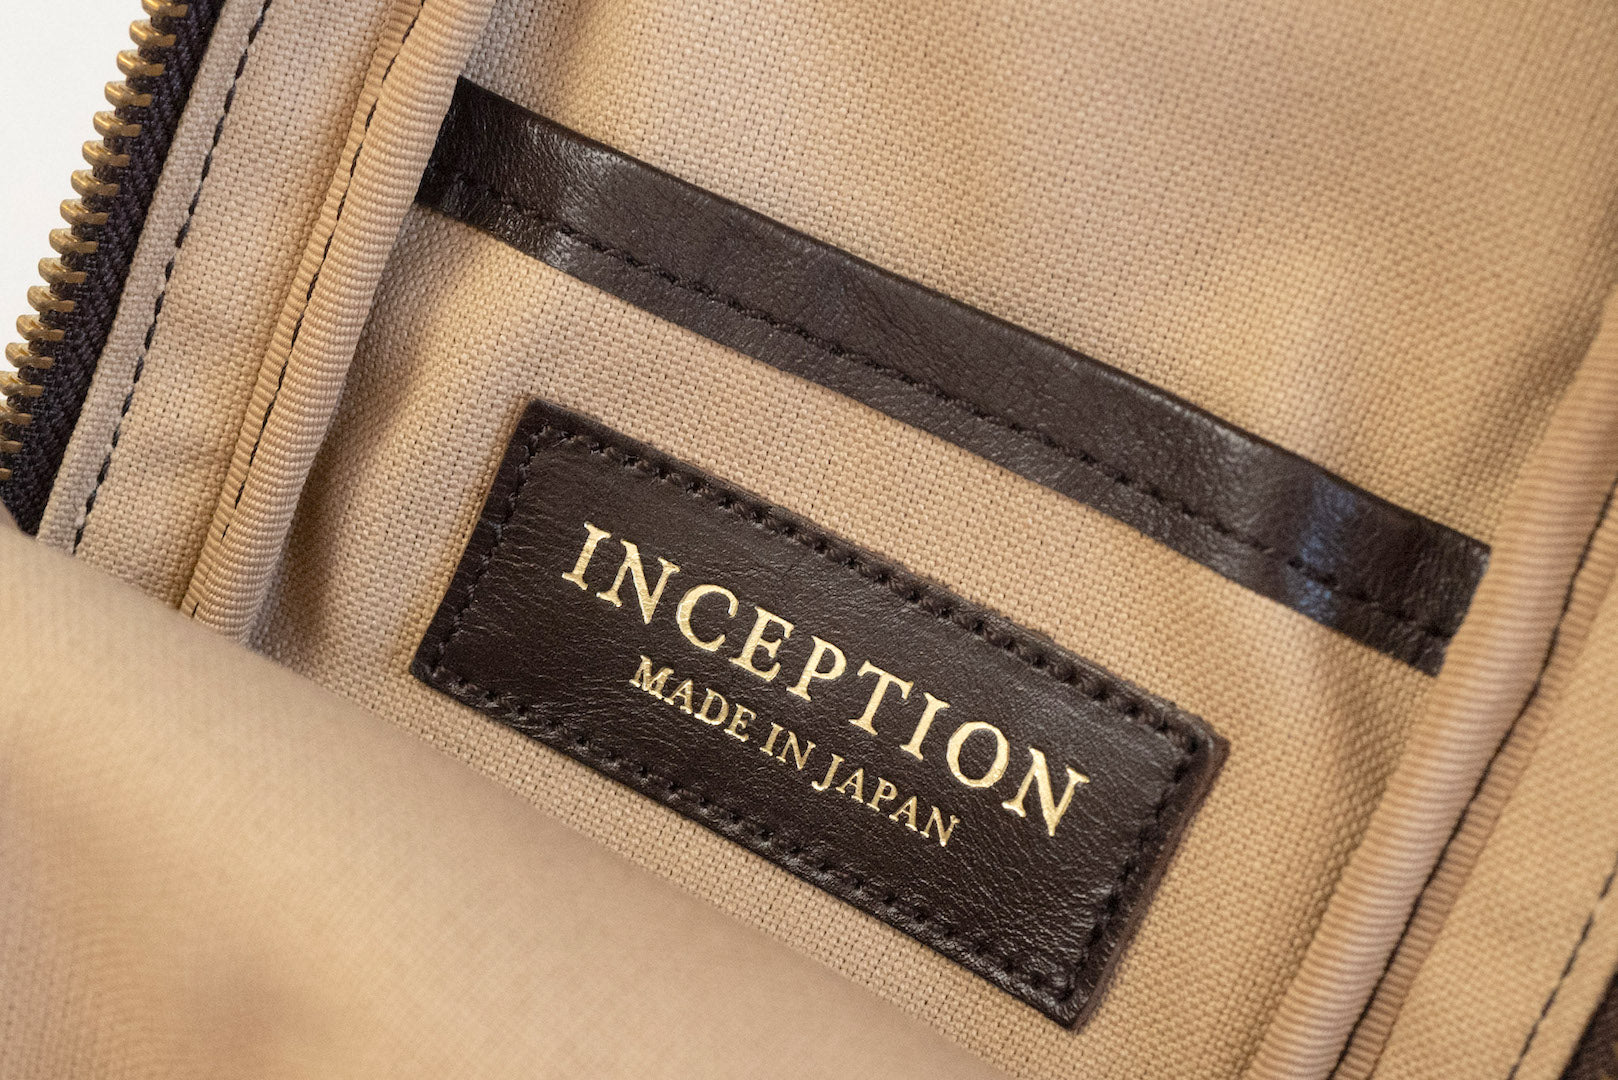 Inception by Accel Company Horsehide Utility Pouch Bag (Brown Tea-cored)